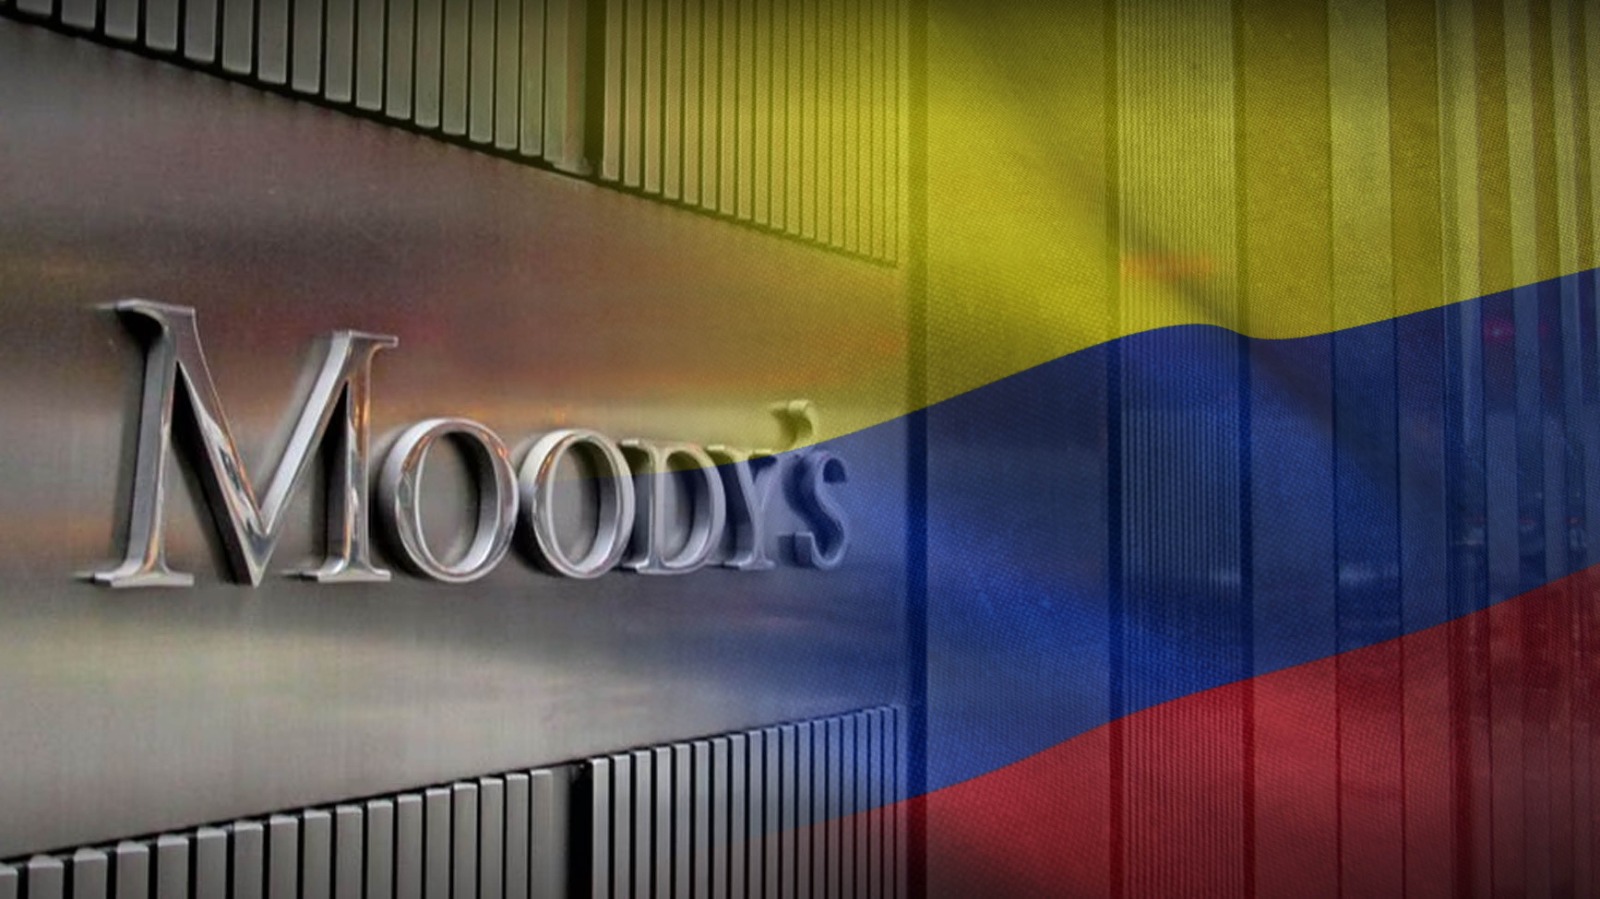 The political counterweight has worked in Colombia according to Moody's